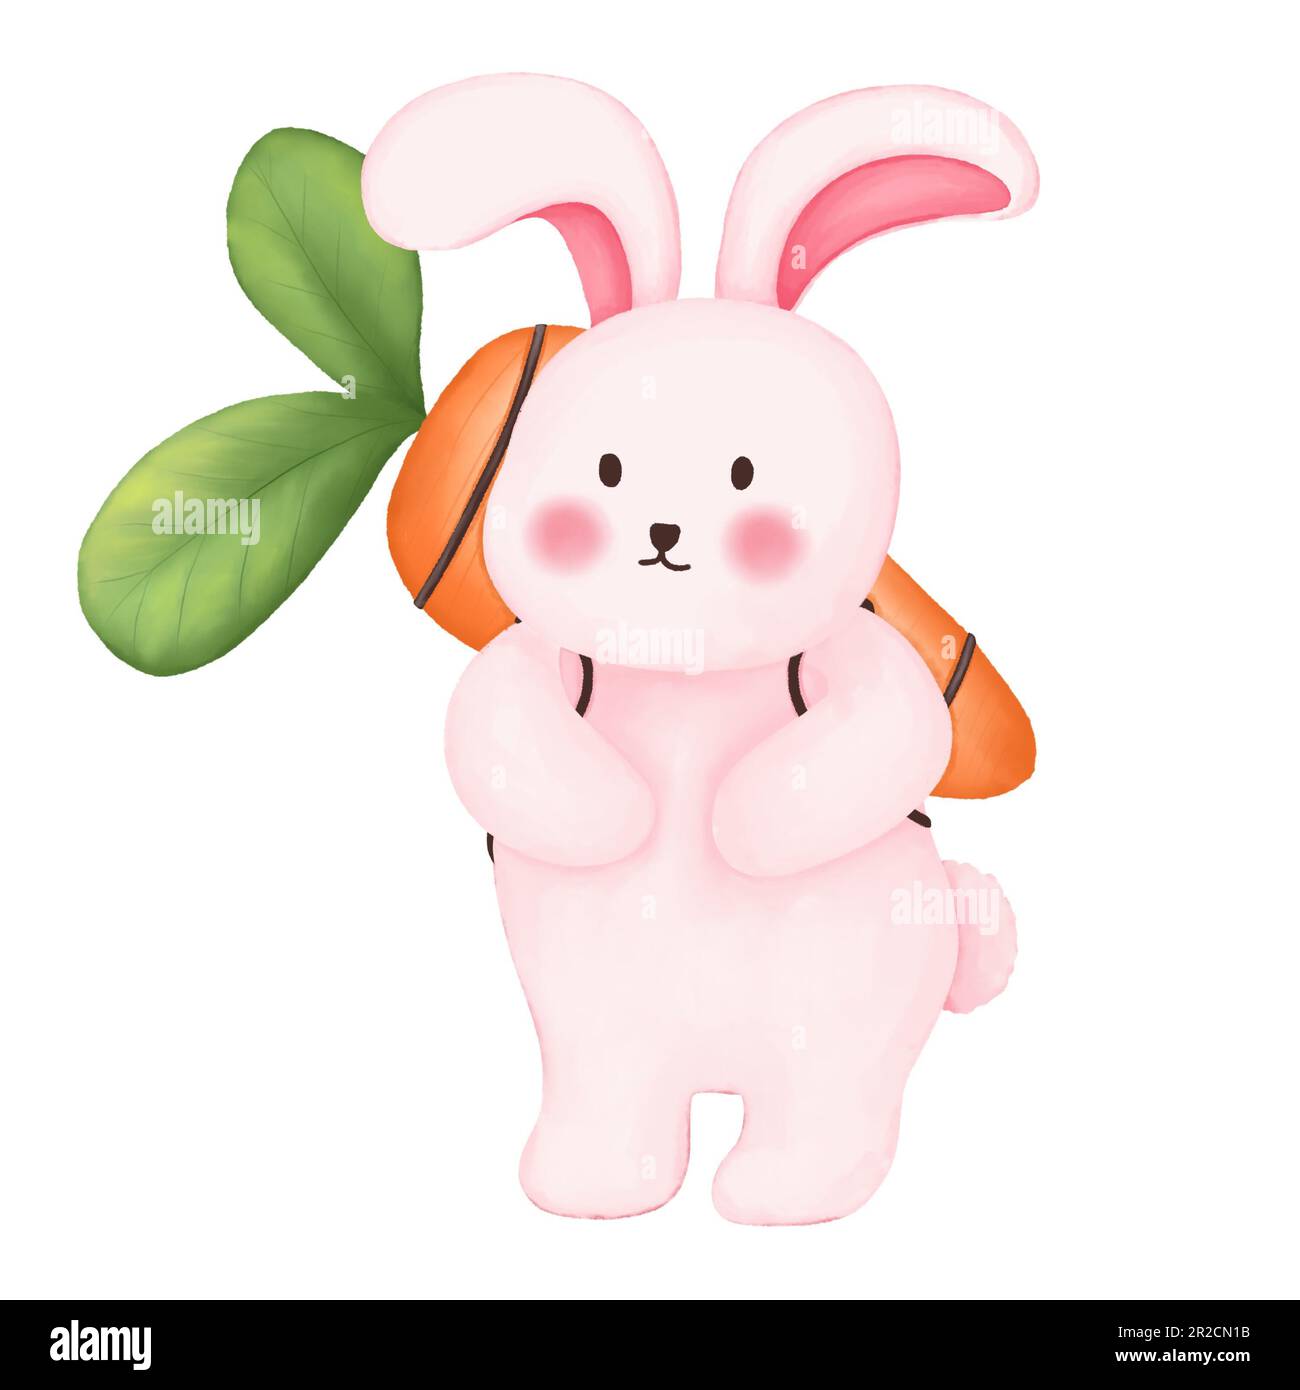 Easter bunny with carrot. Watercolor rabbit and carrot illustration. Easter Day element,greeting cards,wallpaper,stationary,etc. Stock Photo